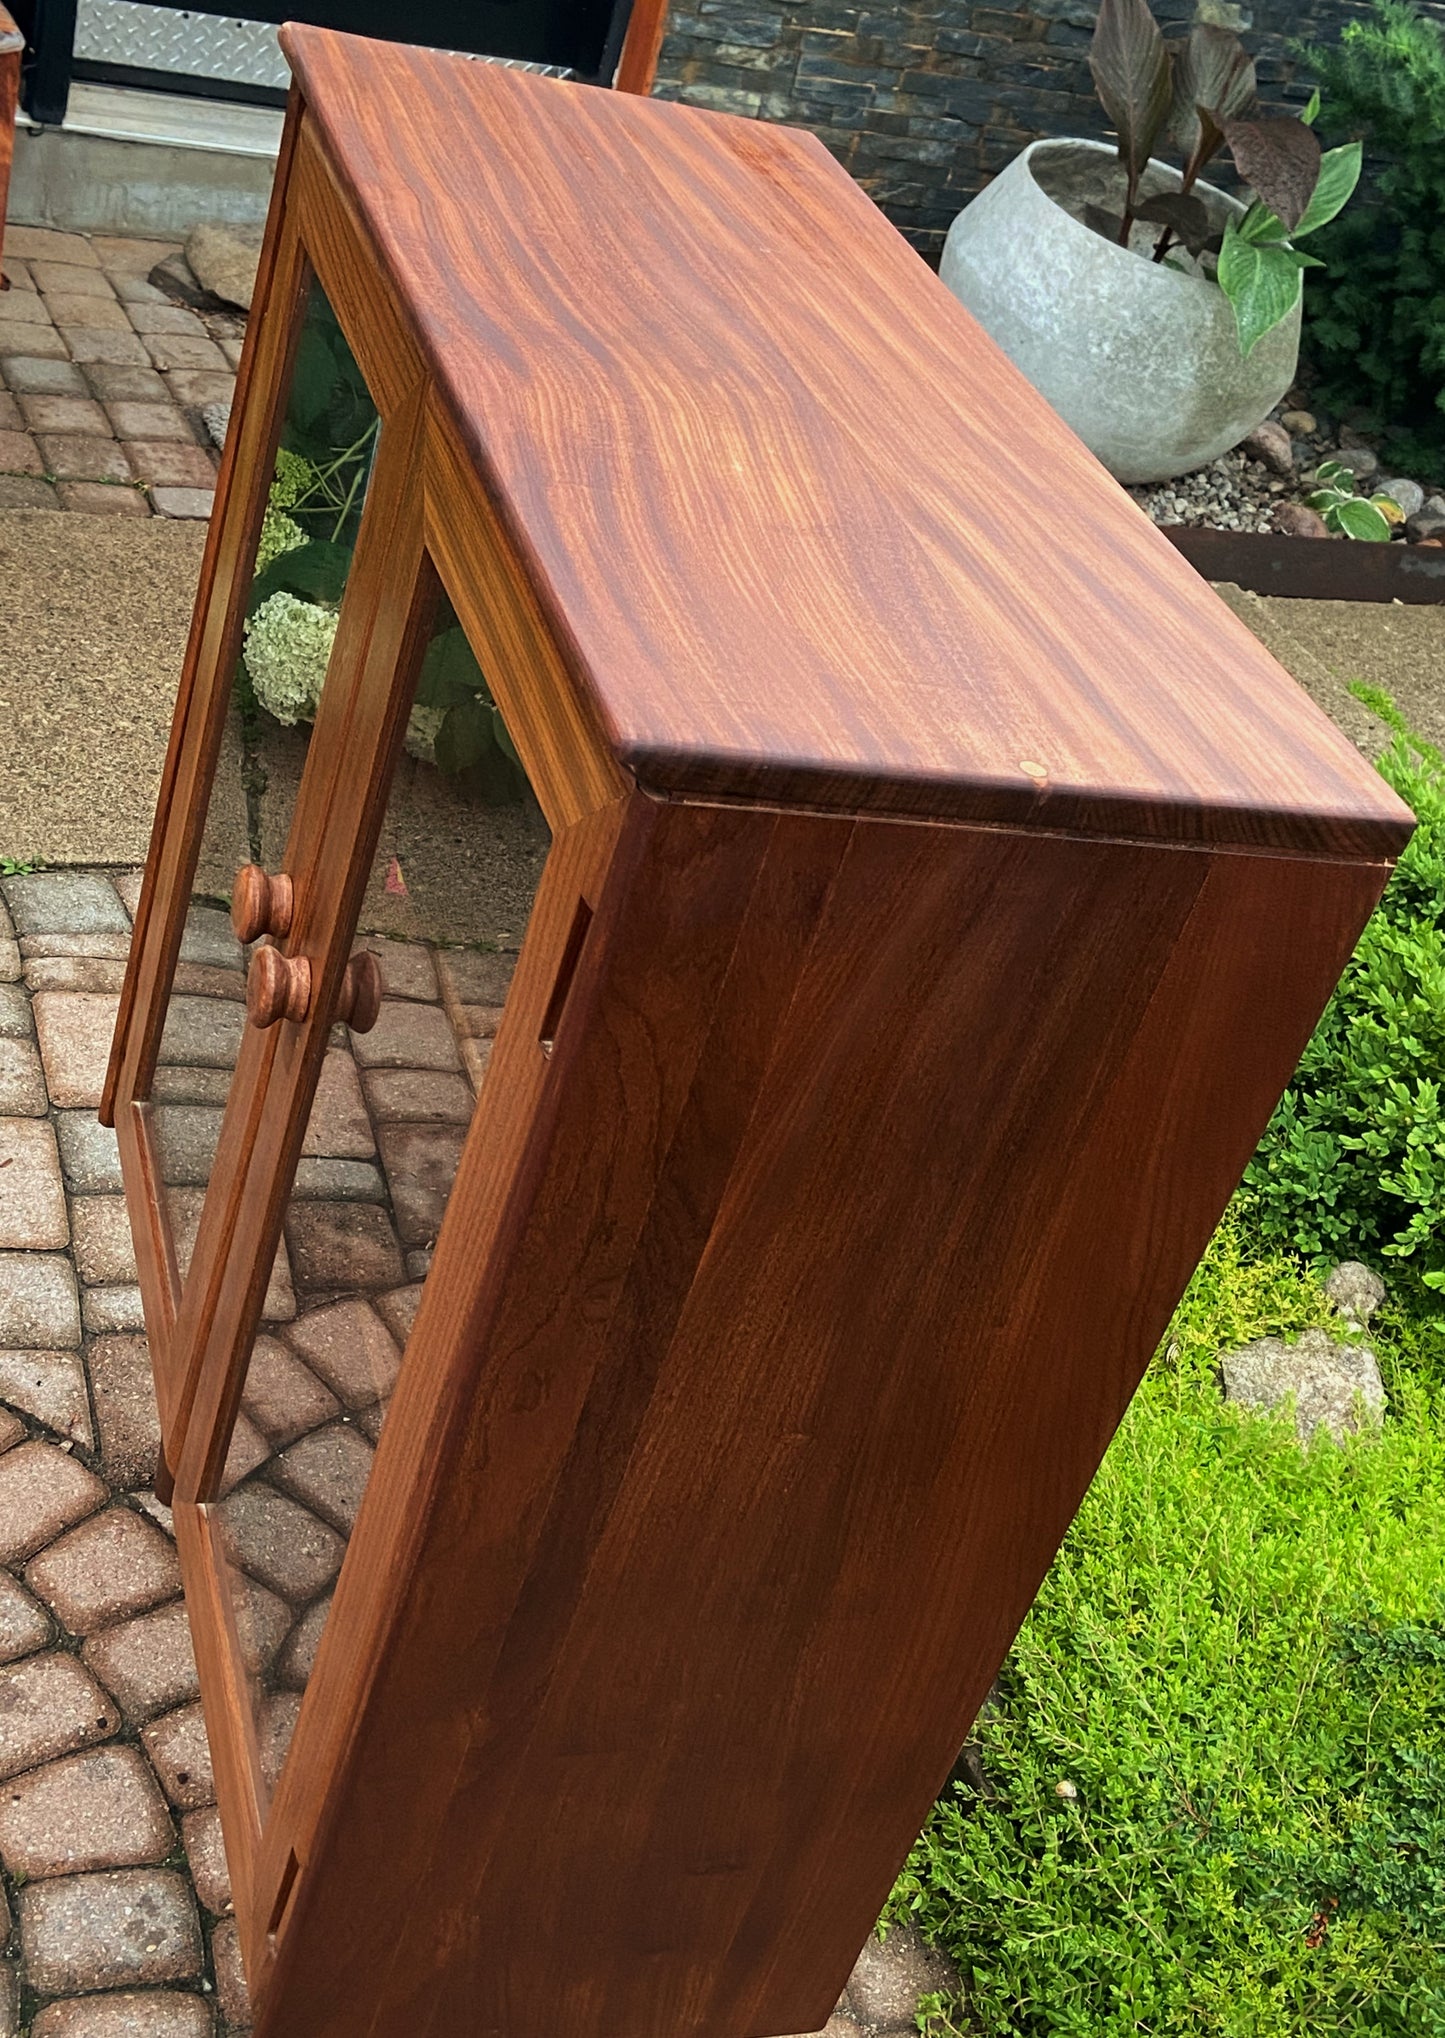 REFINISHED Mid Century Modern SOLID TEAK Bookcase 33.6", PERFECT